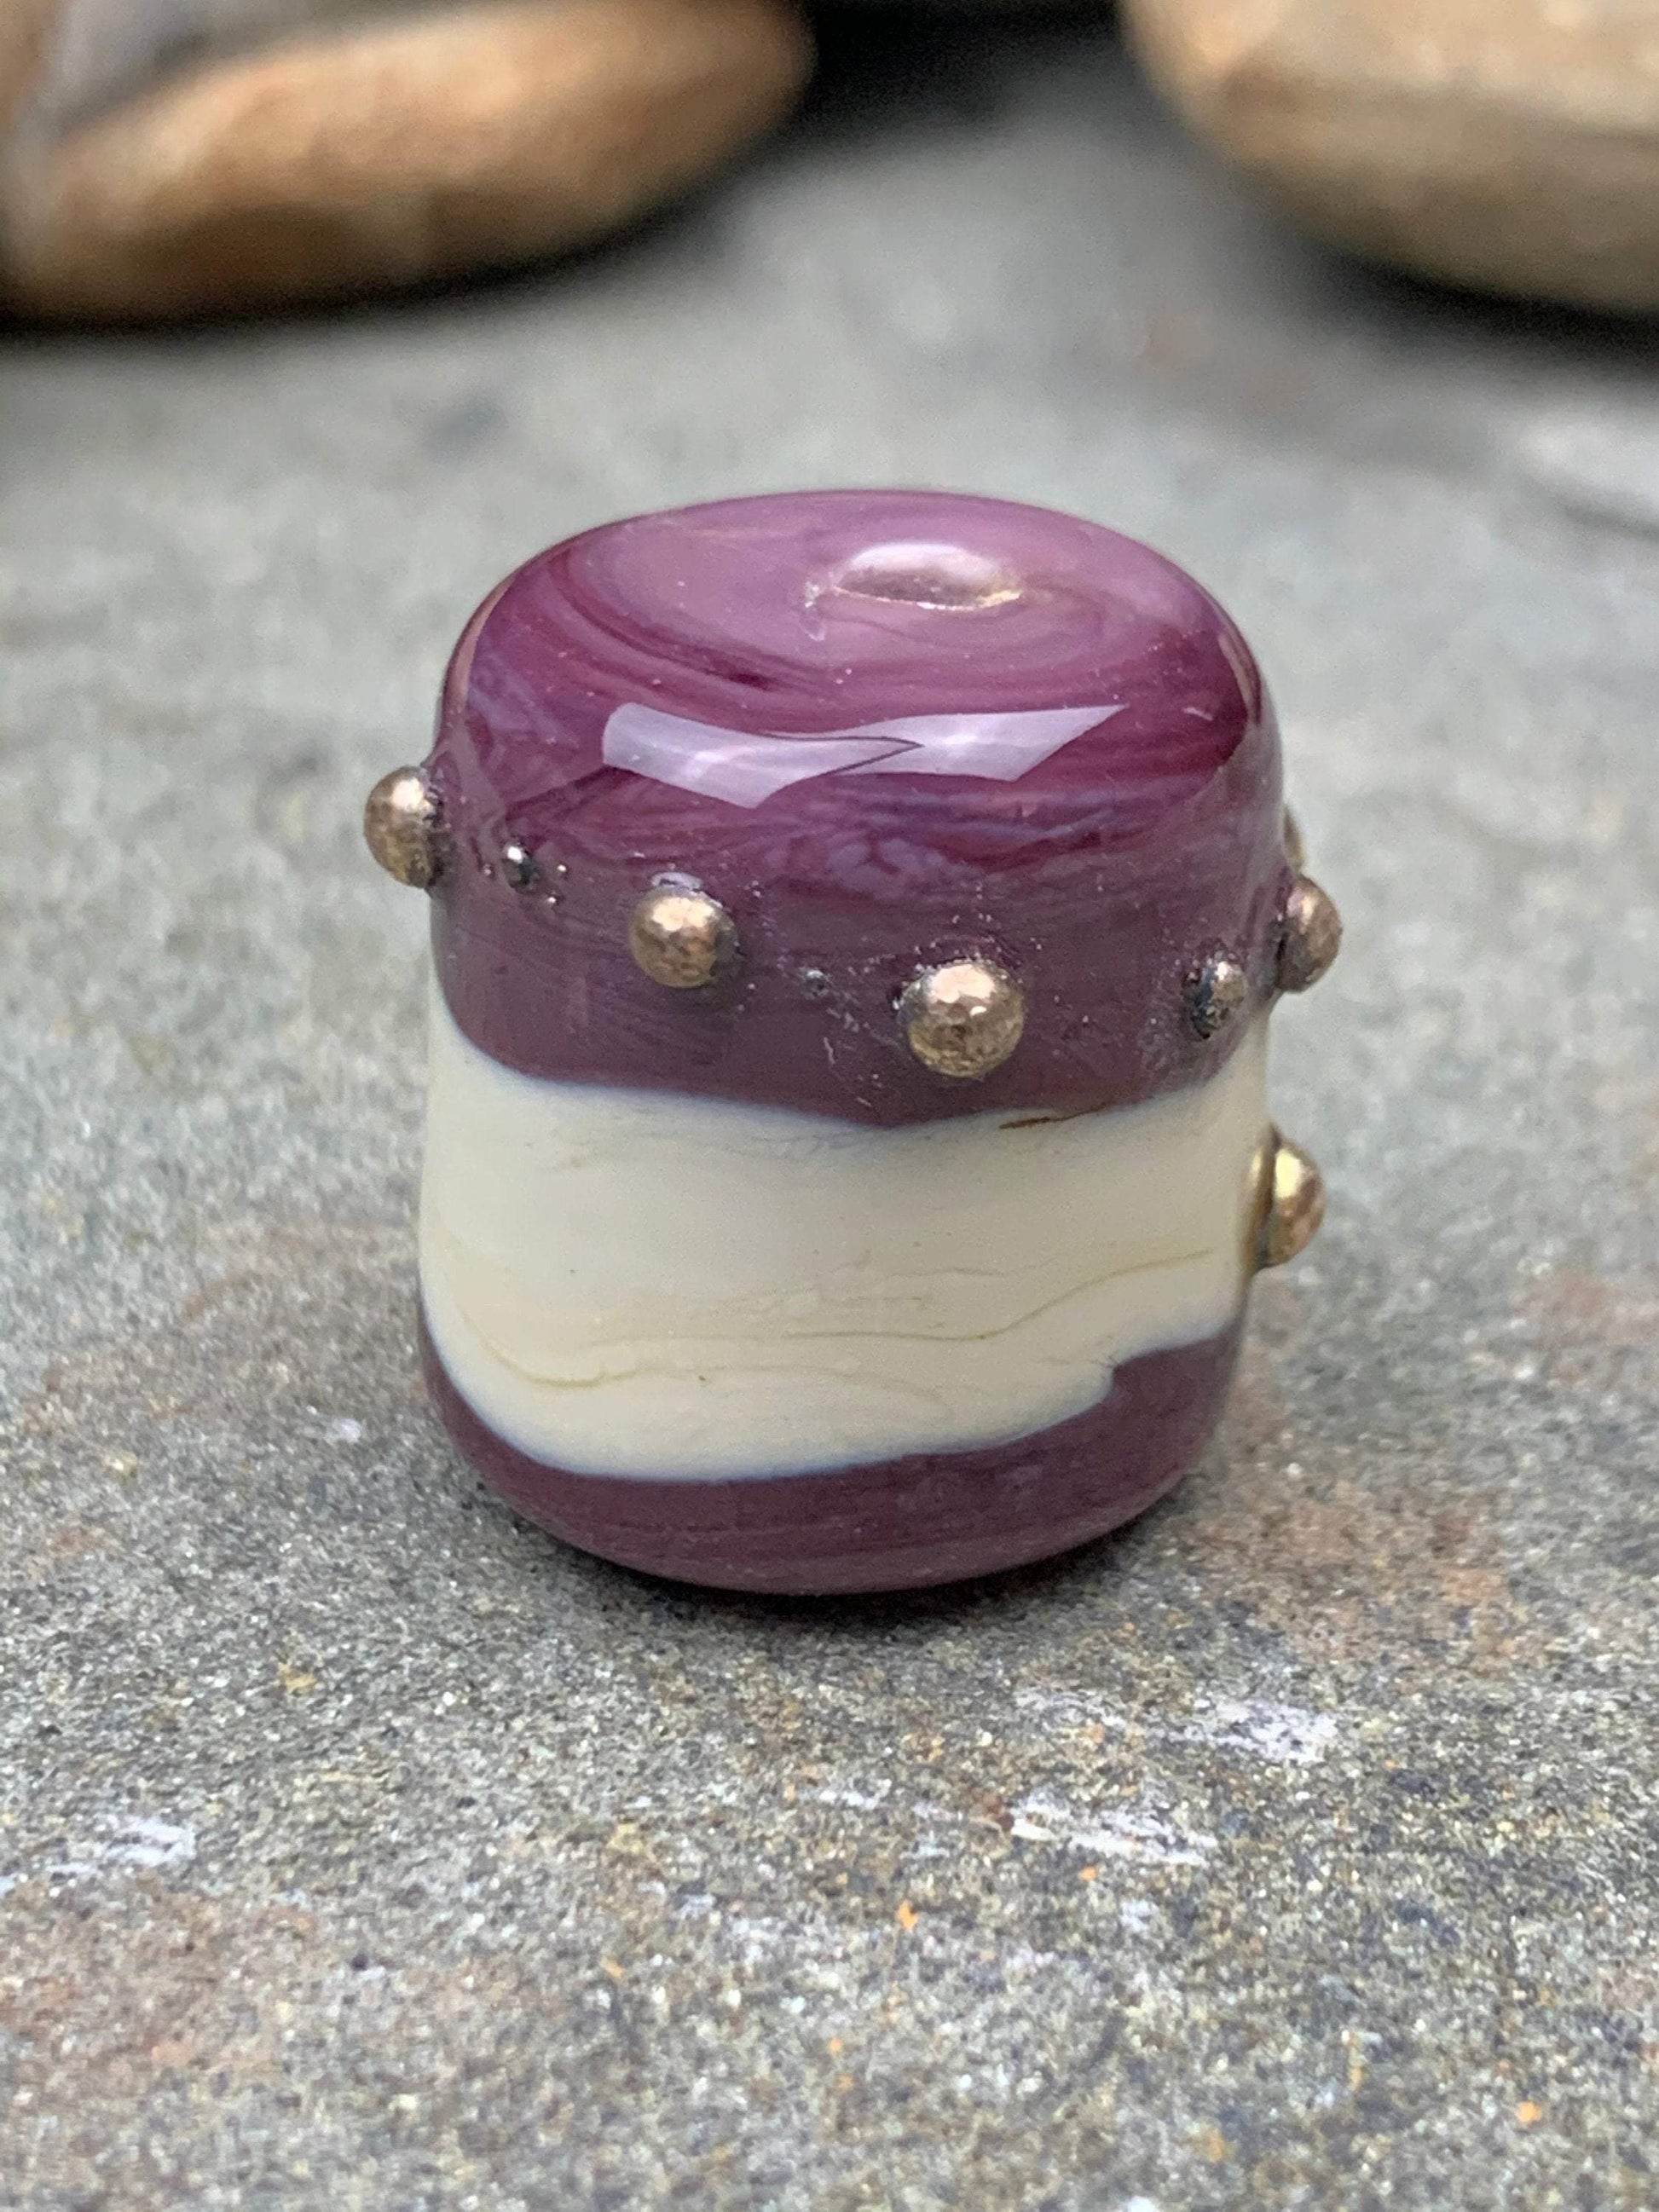 a handmade lampworked glass bead with real silver dots on an ivory and purple background